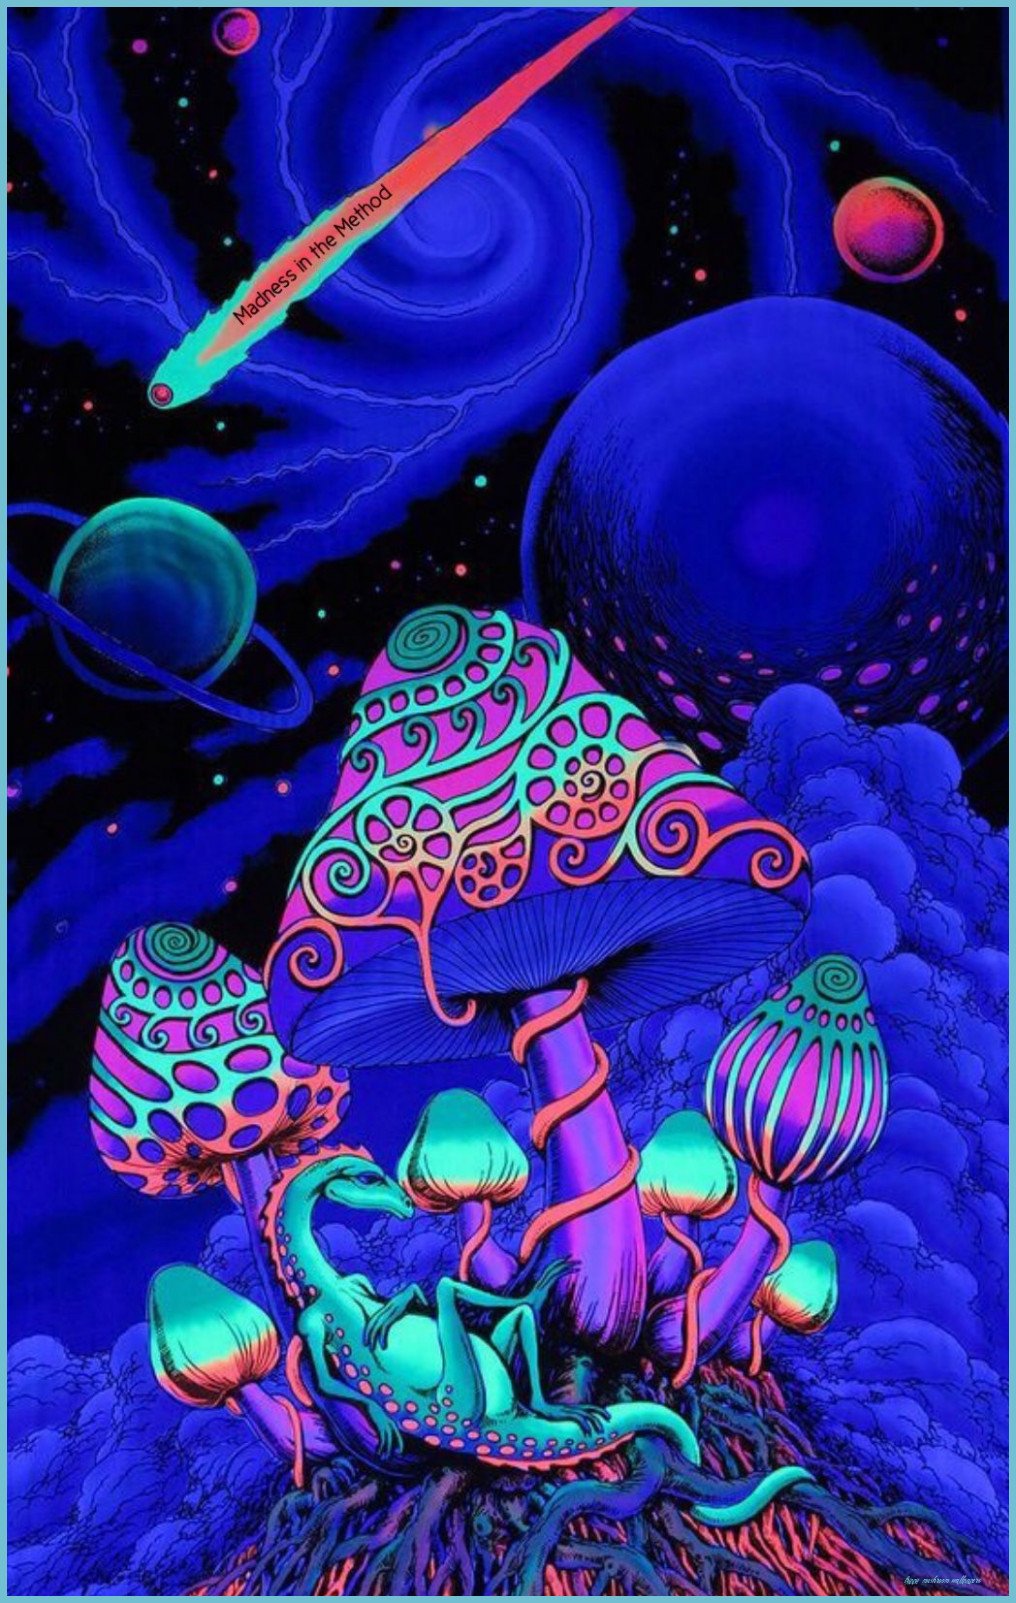 Common Myths About Trippy Mushroom Wallpaper. Trippy Mushroom Wallpaper